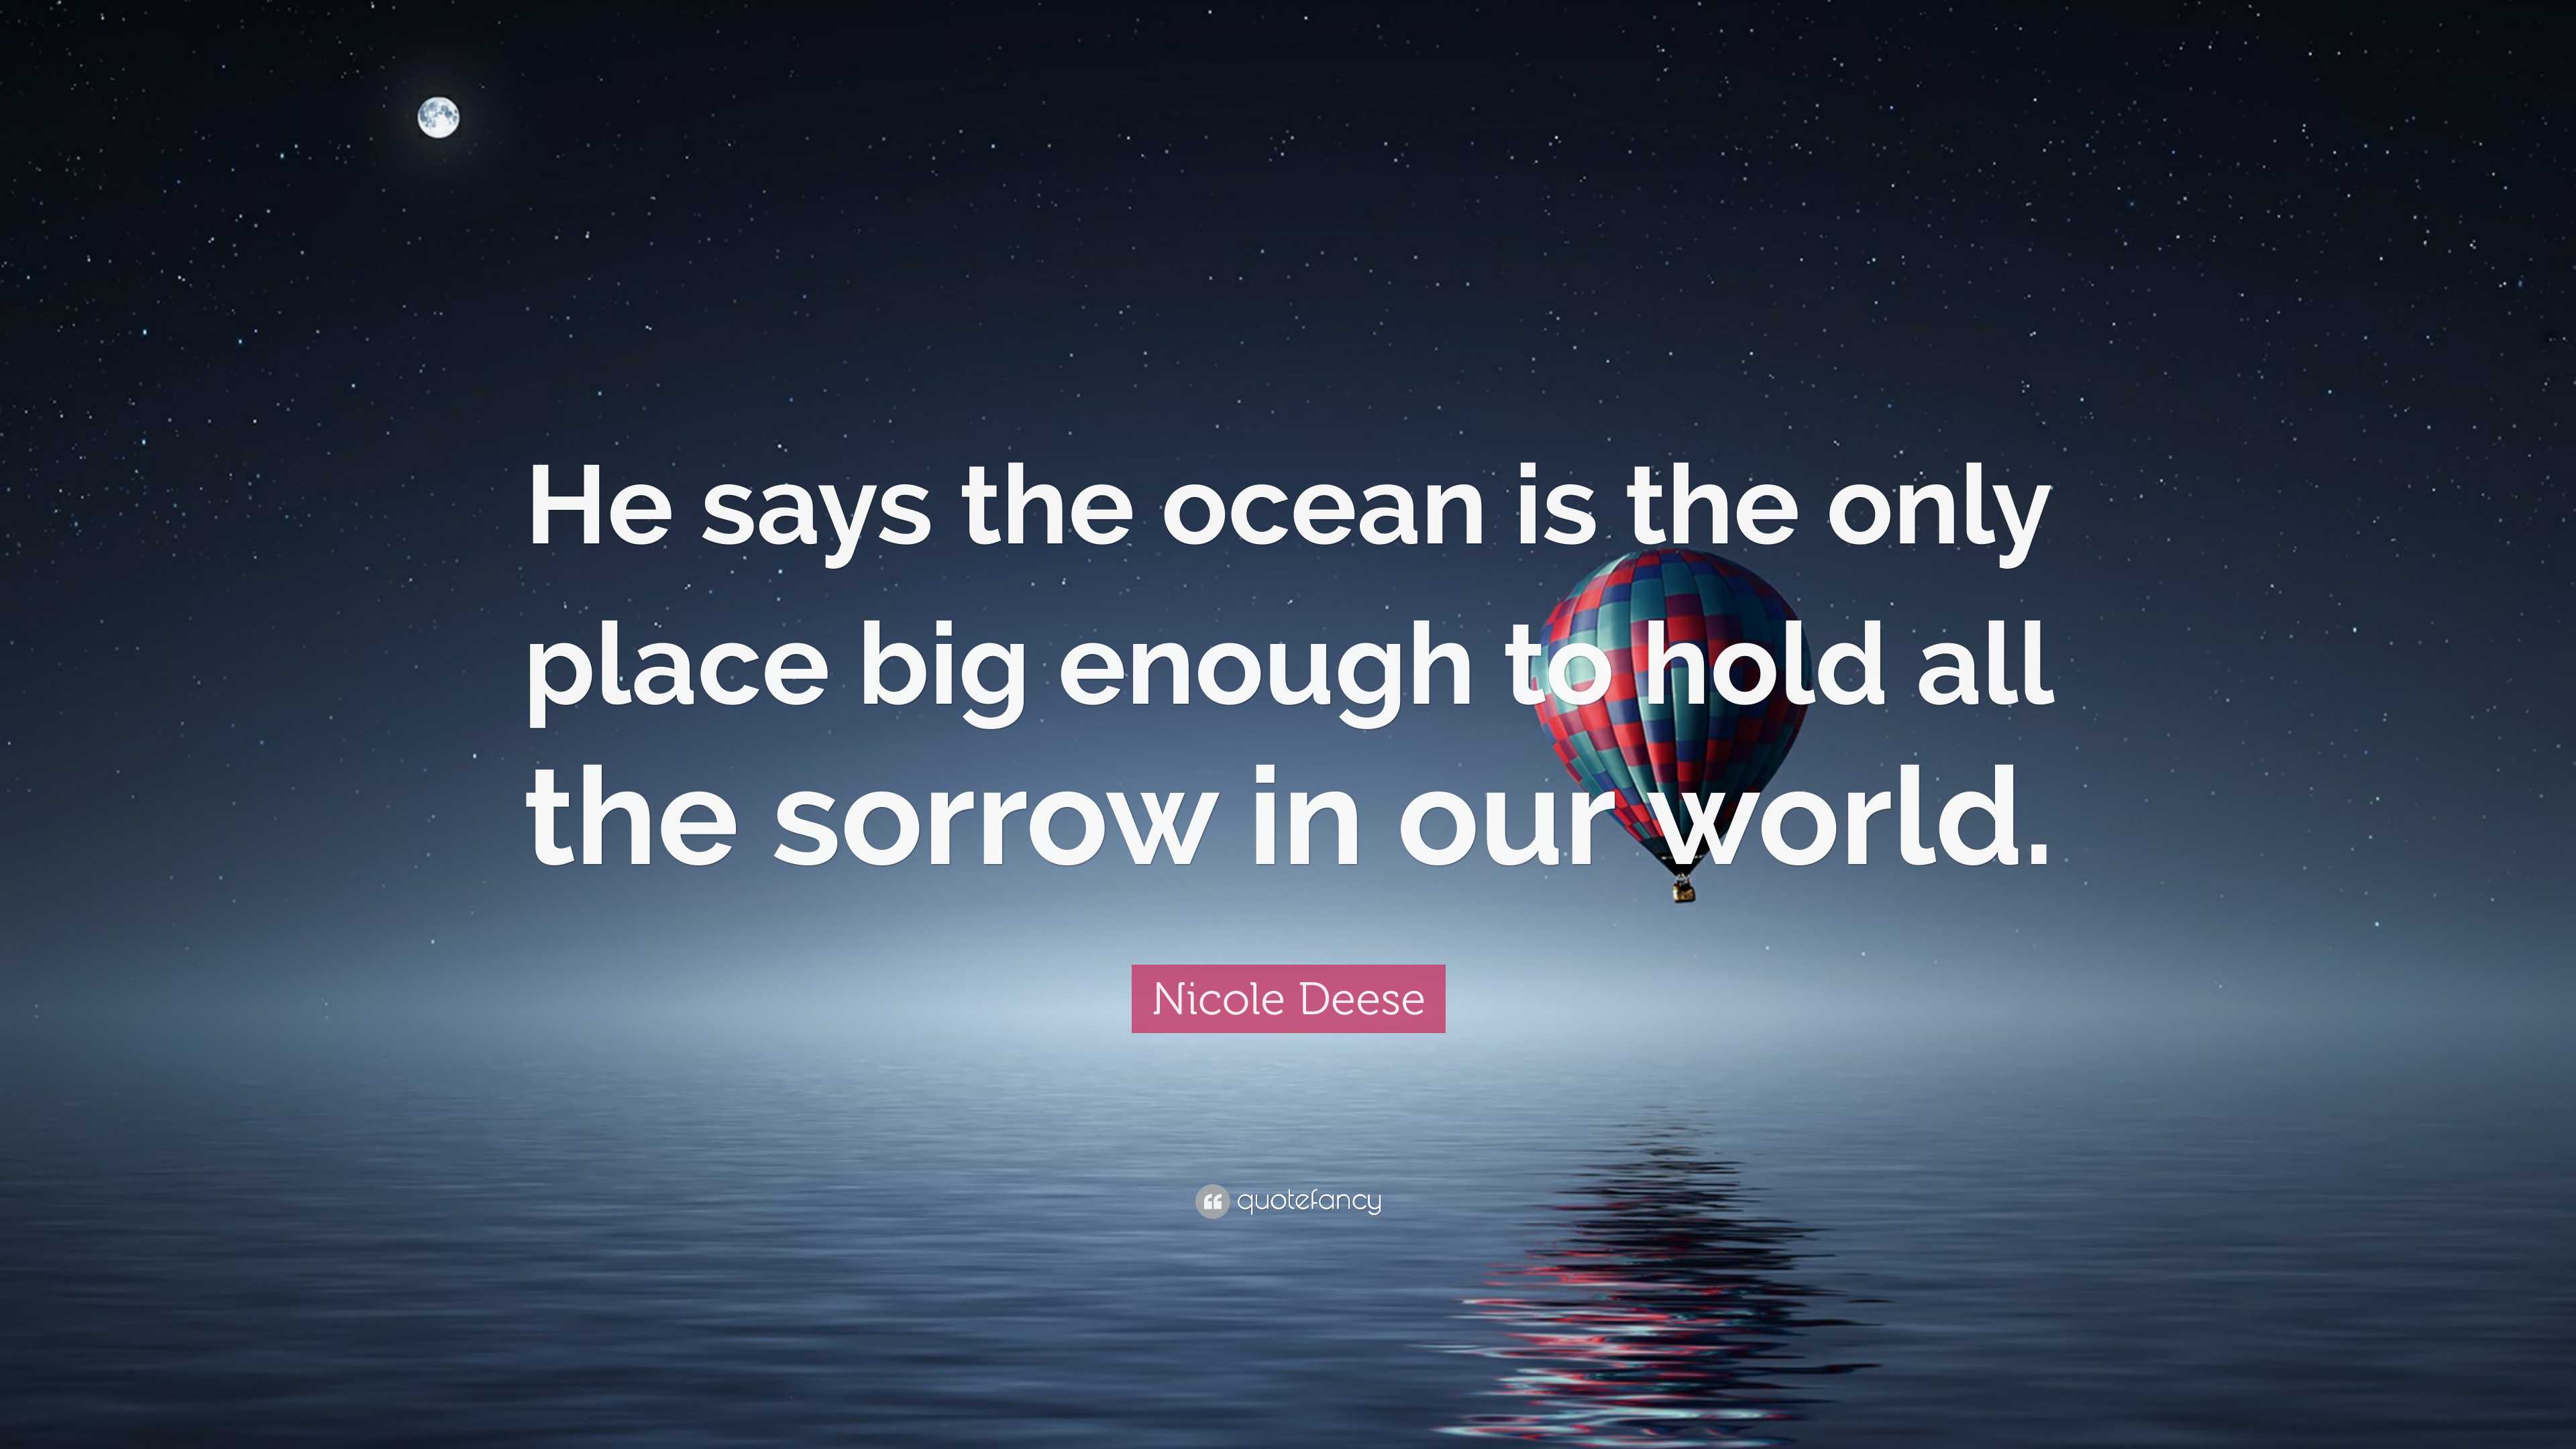 Nicole Deese Quote: “He says the ocean is the only place big enough to ...